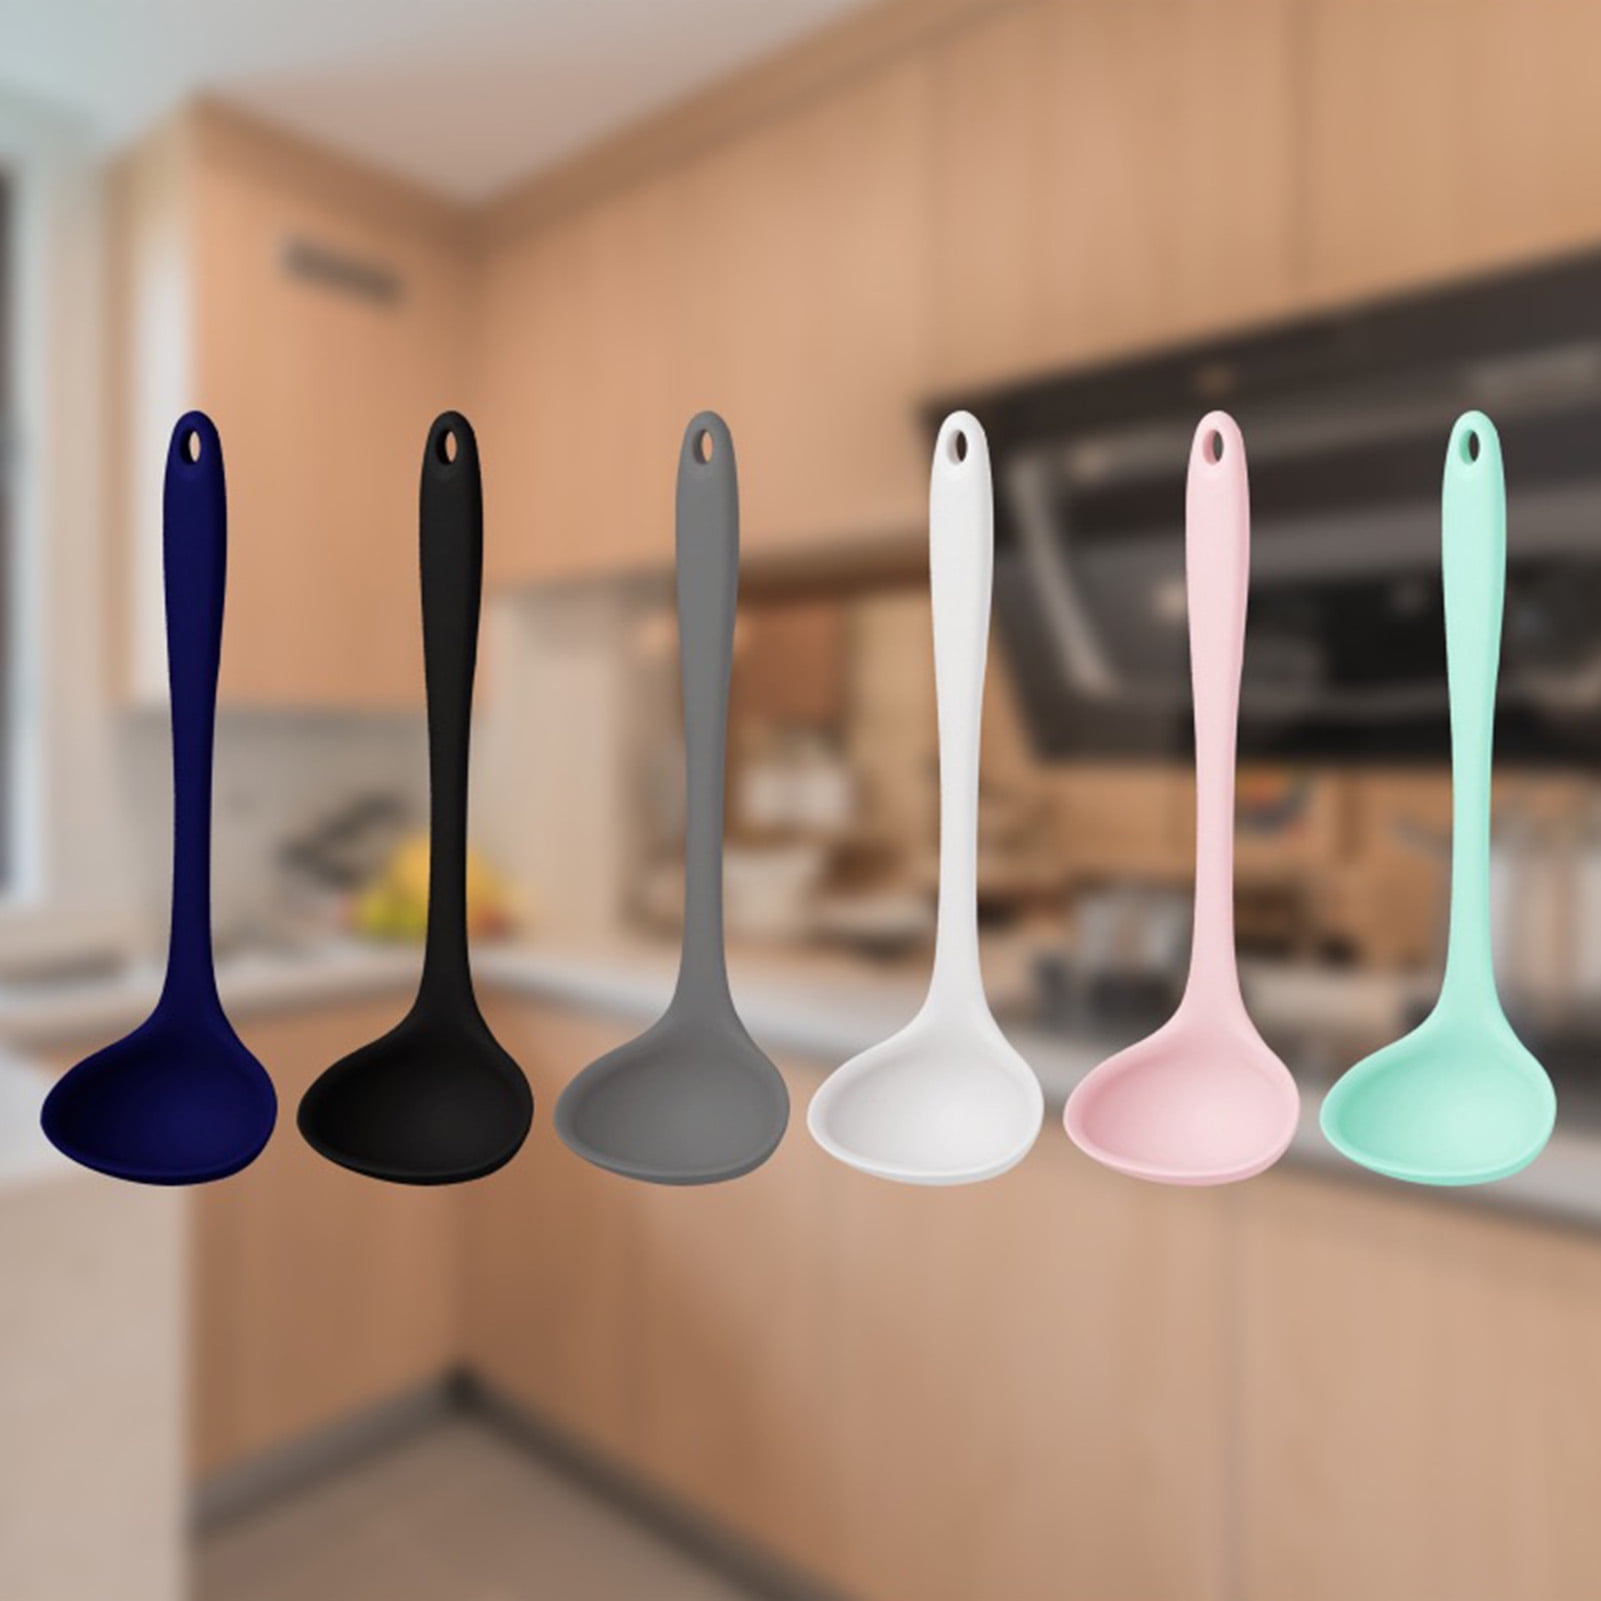 LADLE - Ultimate Flexible, Silicone Ladle - Erin Chase Store